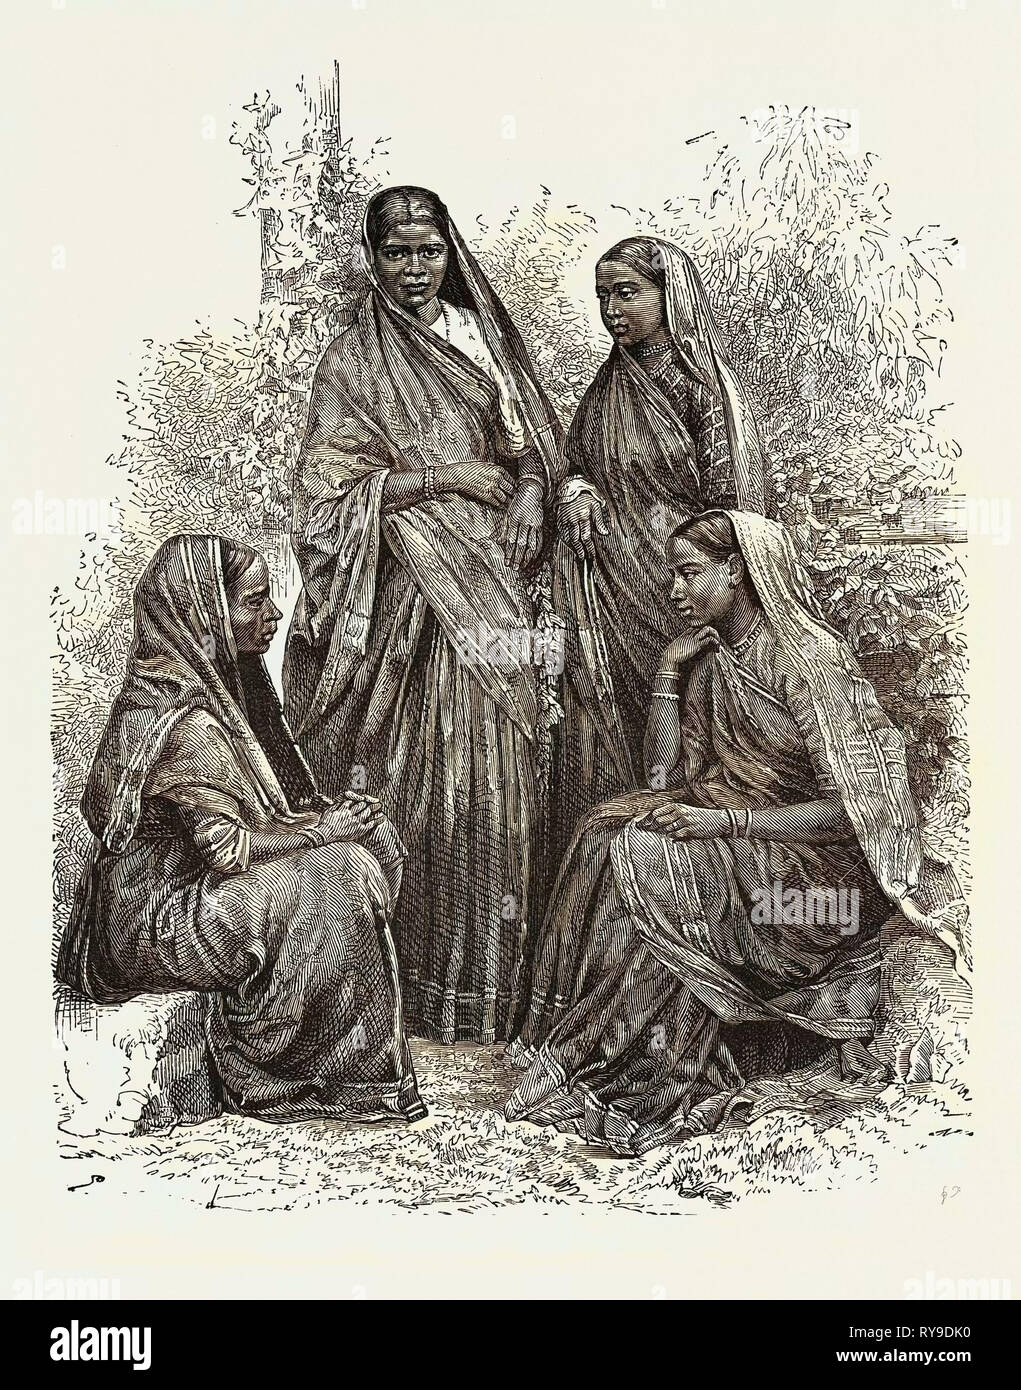 Native Women (Bombay Presidency), Converts to Christianity. The Bombay Presidency Was a Province of British India. It Was First Established at Surat in the 17th Century As a Trading Post for the English East India Company, But It Later Grew to Encompass Much of Western and Central India, As Well As Part of the Arabian Peninsula and Areas Later Included in Pakistan Stock Photo